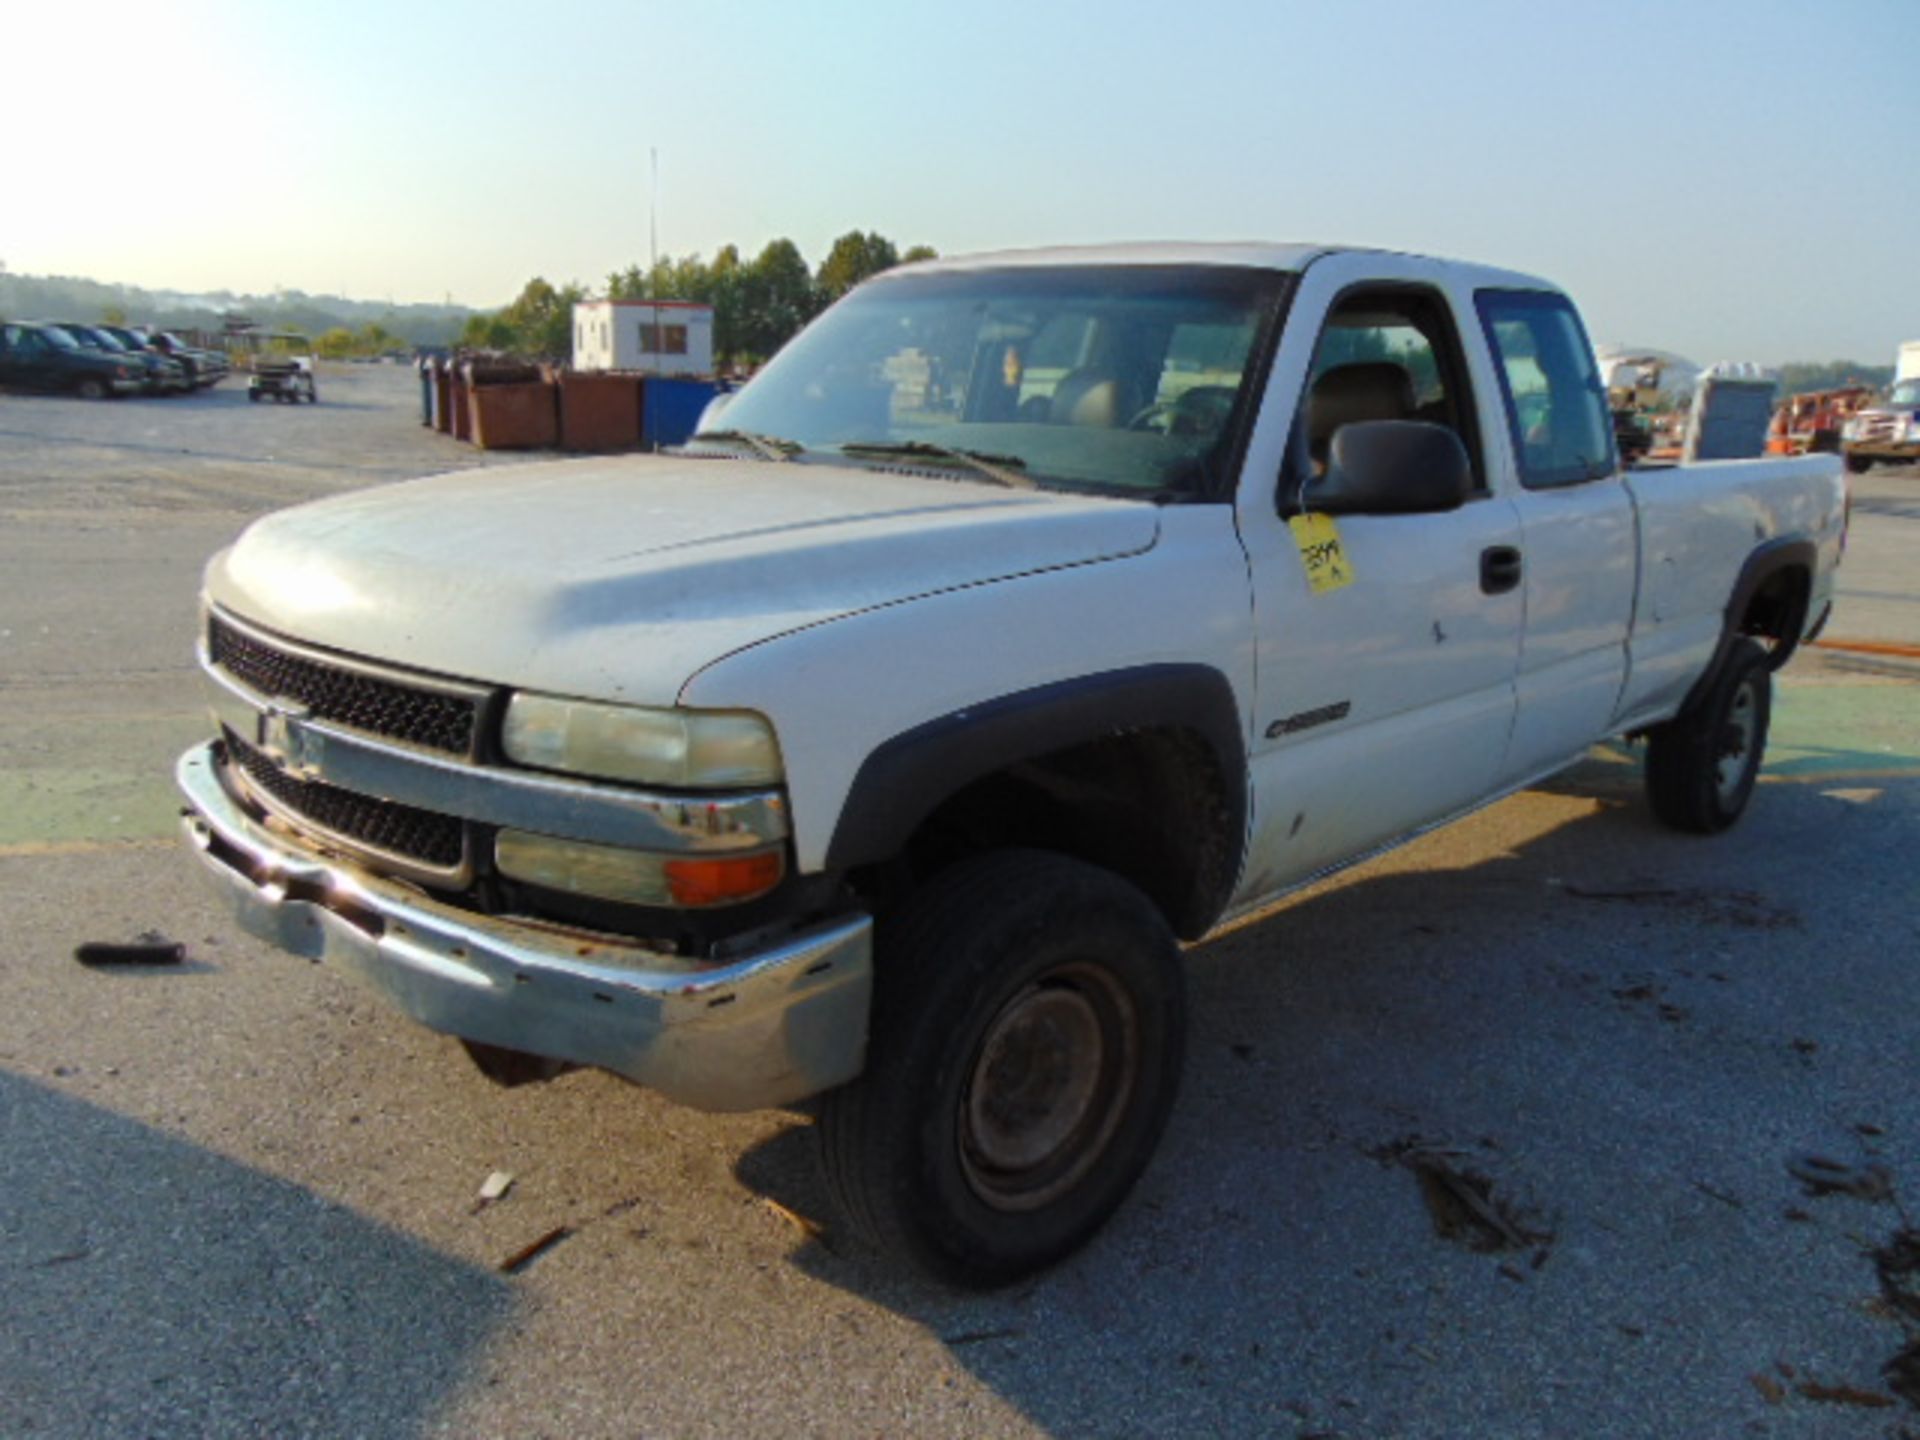 PICKUP TRUCK, CHEVROLET, SILVERADO 2500 H.D., (YARD USE ONLY, NOT TITLE) - Image 6 of 6